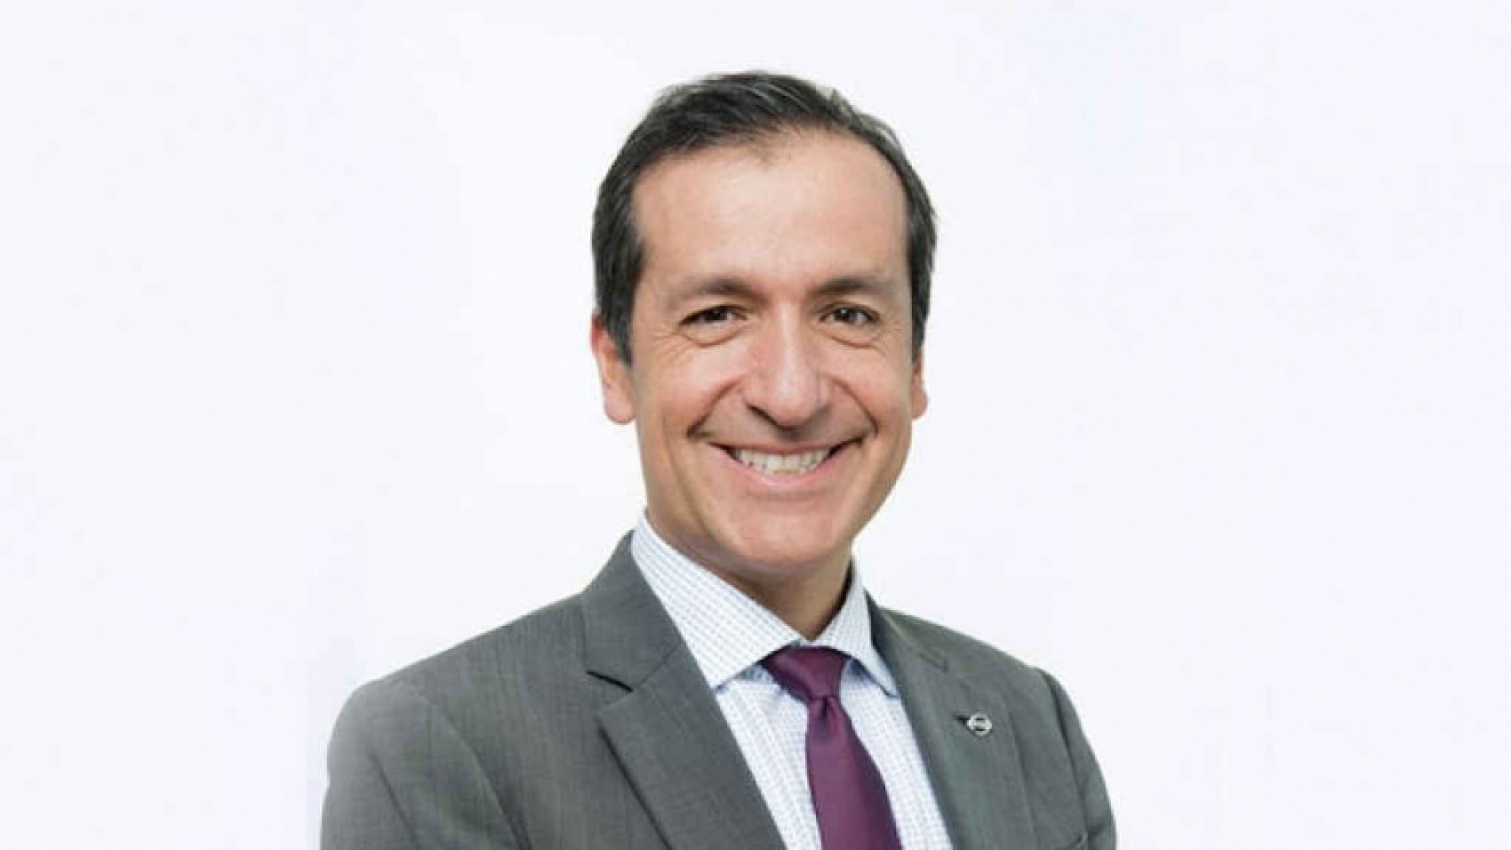 autos, cars, nissan, news, nissan corporate, phl auto industry, nissan philippines appoints juan manuel hoyos as its new president